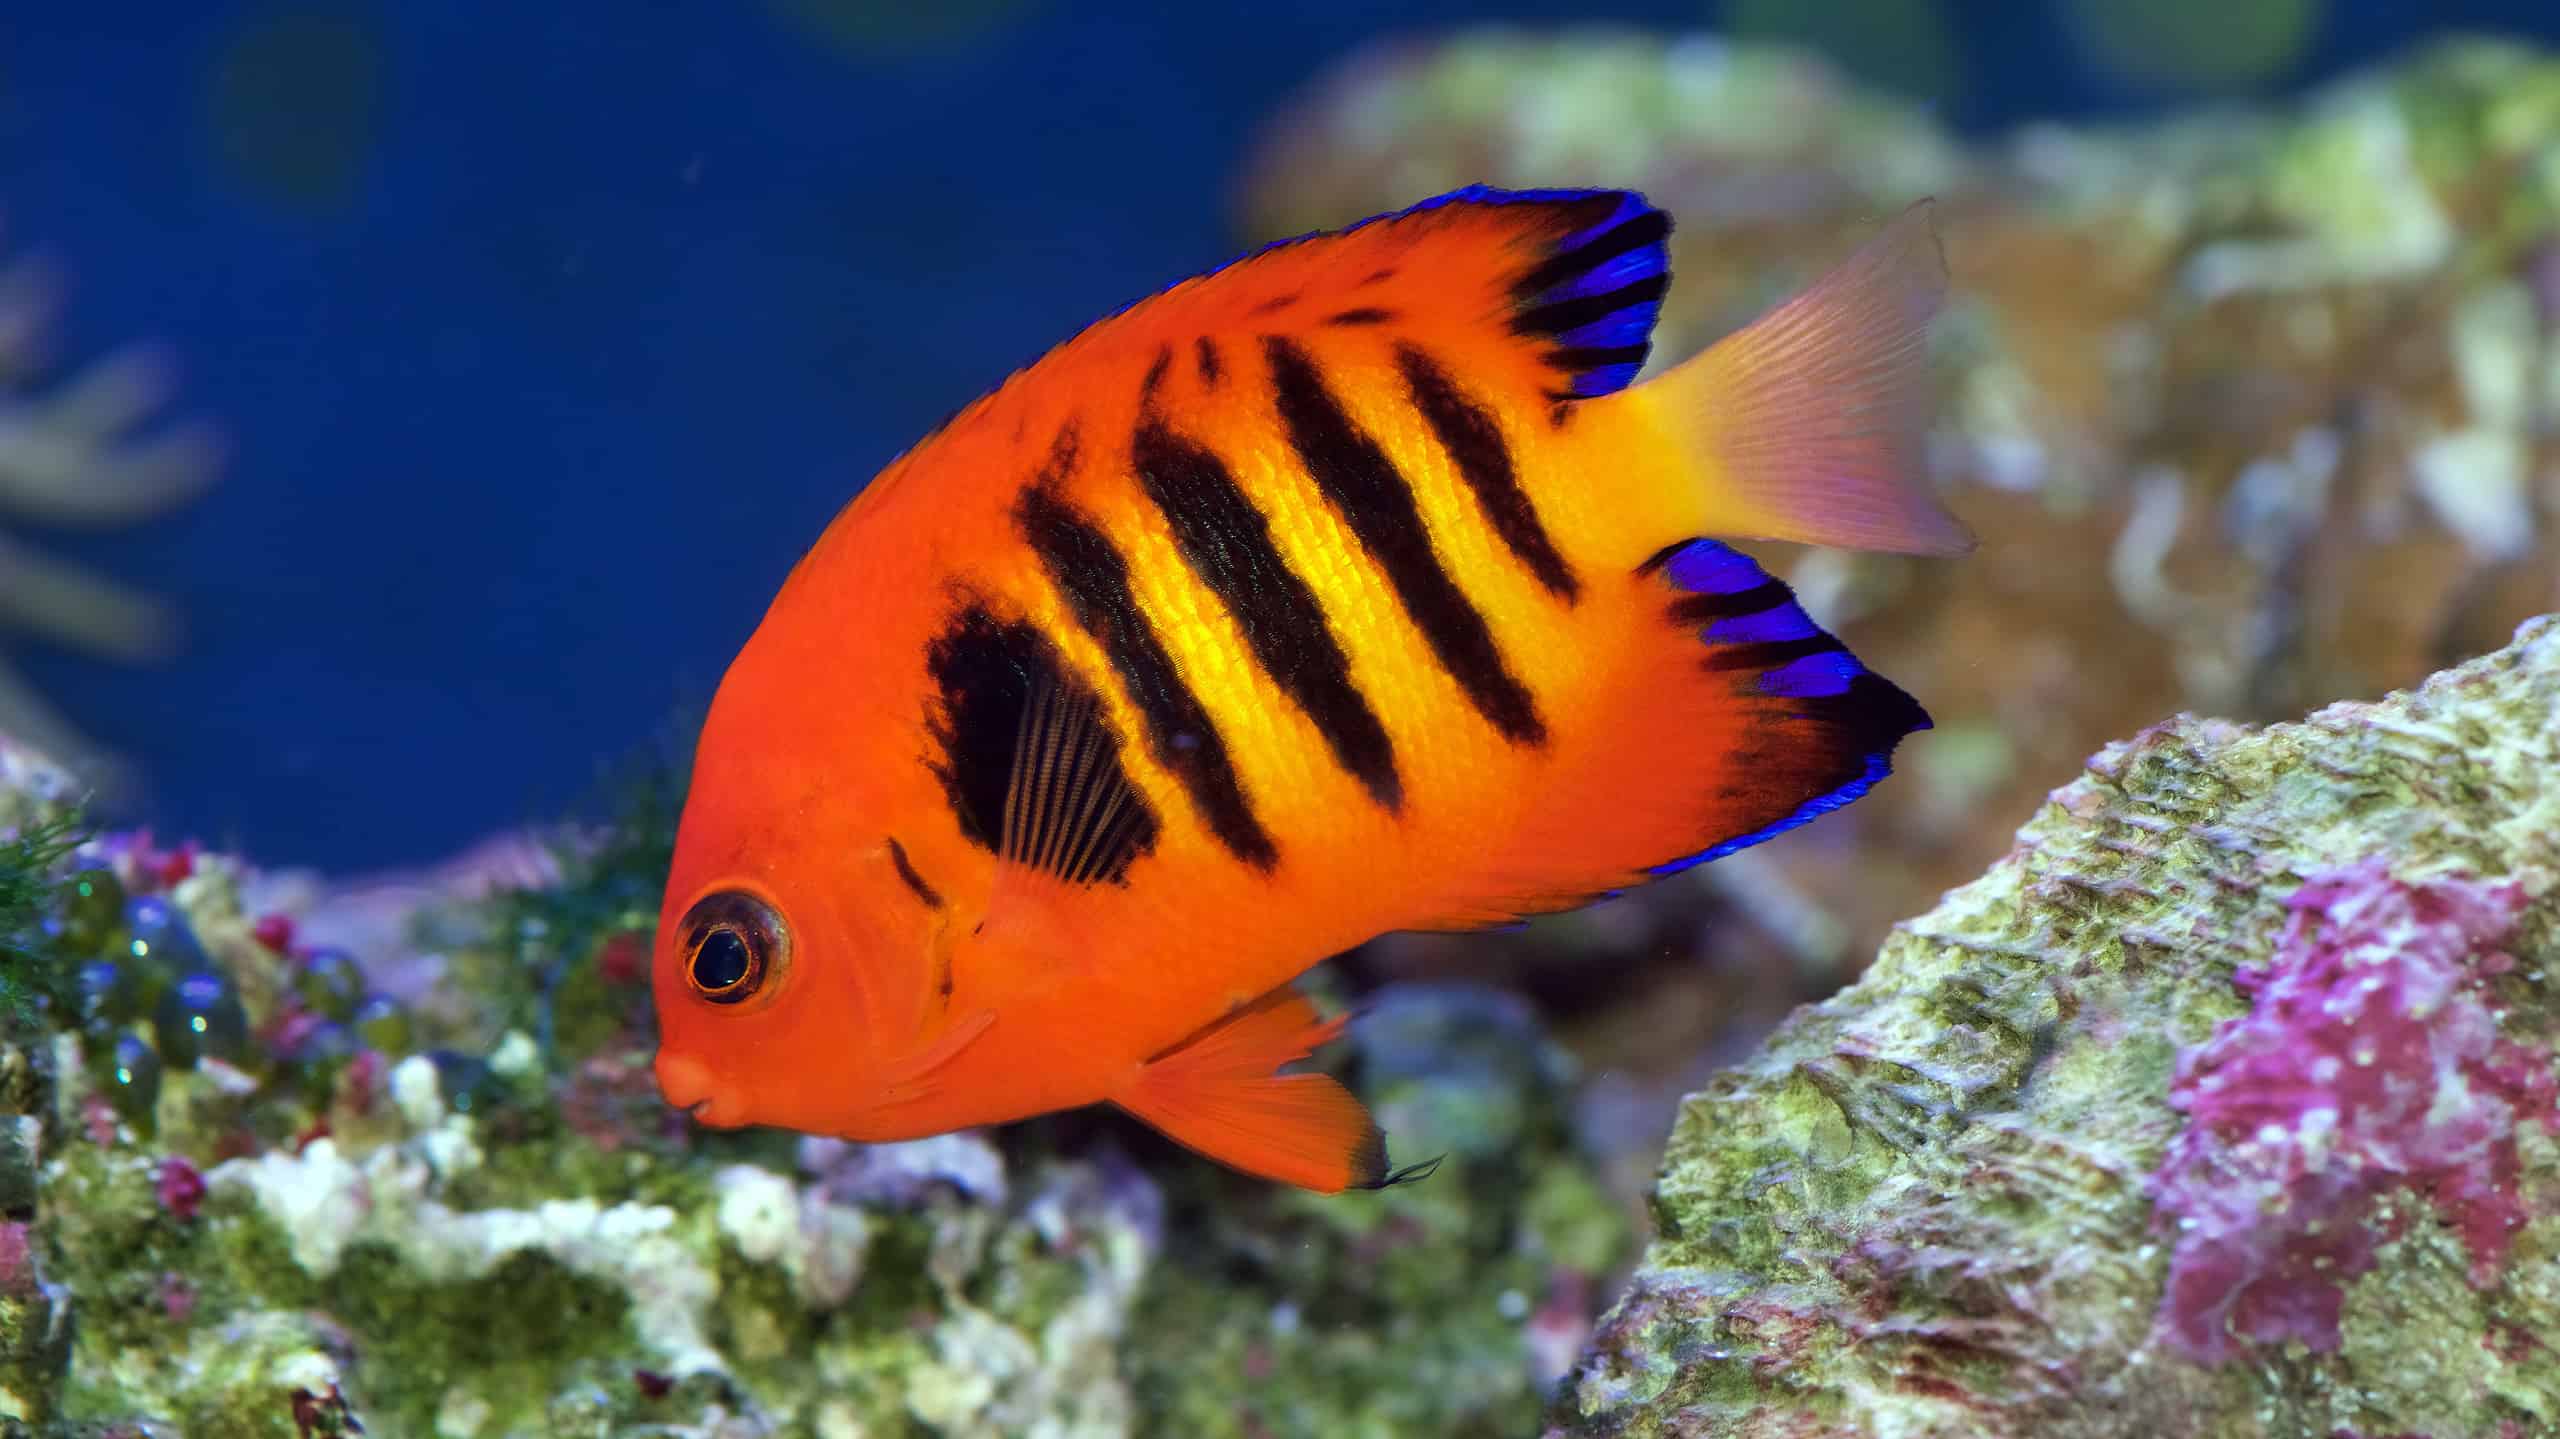 Flame Angelfish, Centropyge loricula, is a dwarf or pygmy marine angelfish from the tropical waters of the Pacific Ocean